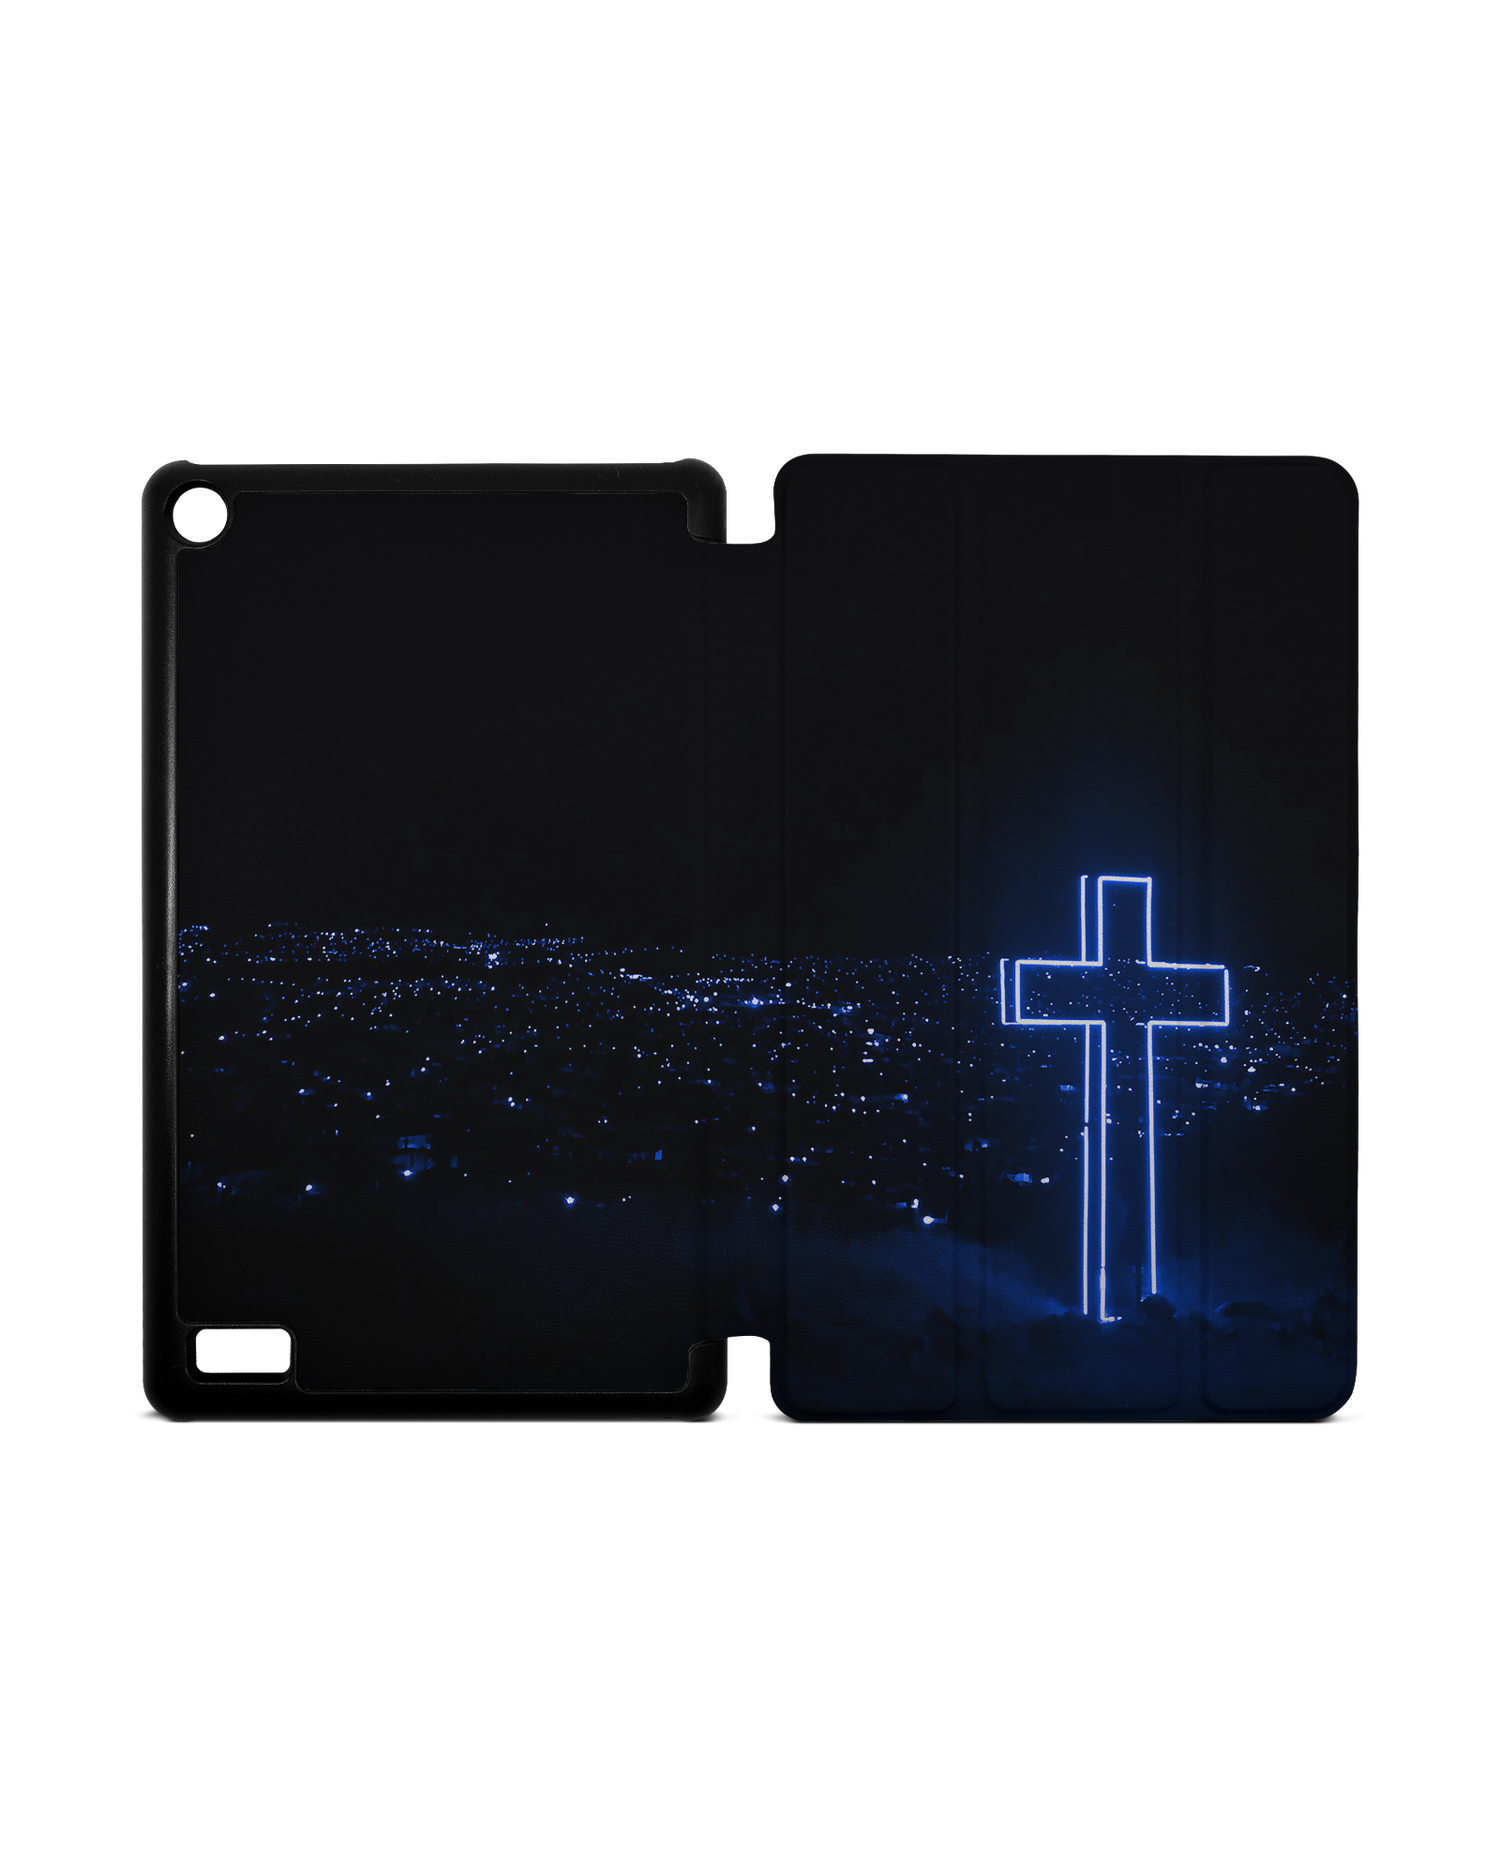 Christian Cross Tablet Smart Case for Amazon Fire 7: Opened